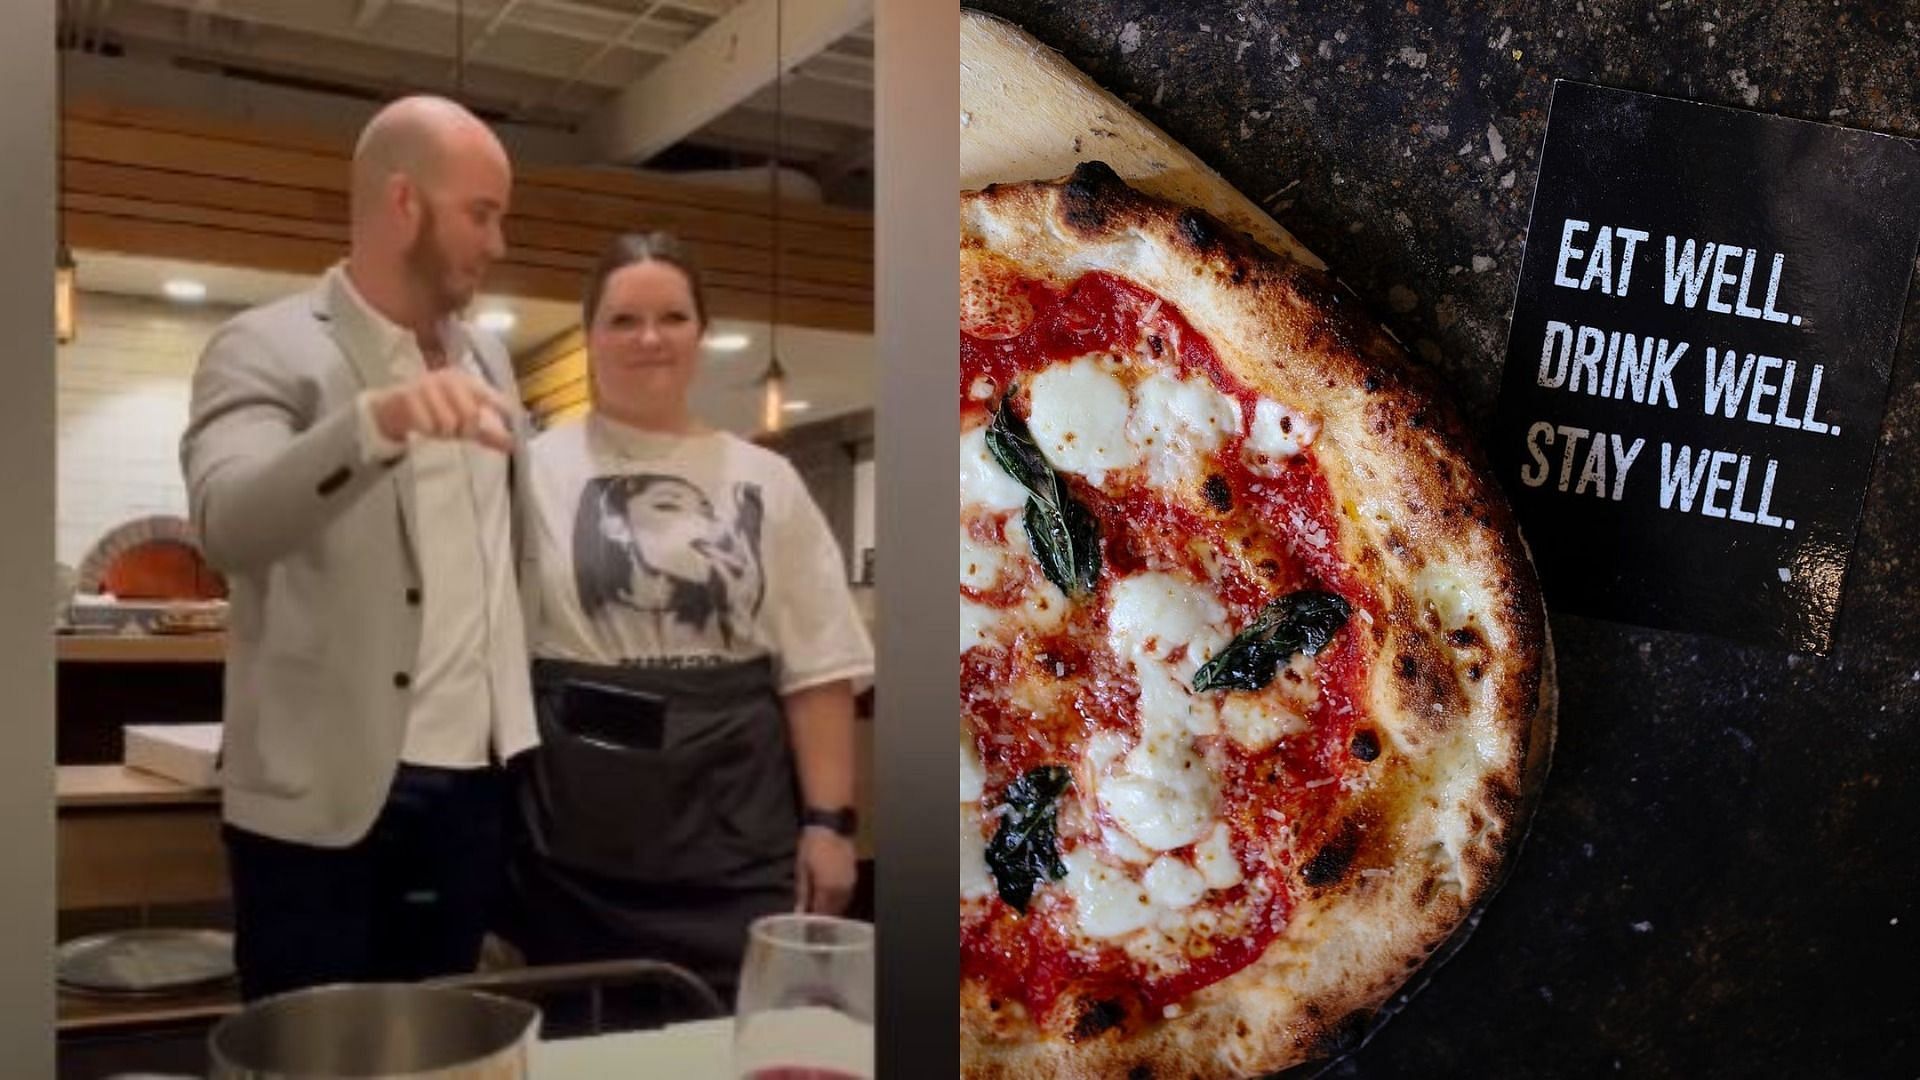 Oven and Tap waitress Ryan Brandt was fired over $4,400 tip controversy (Image via rebeccacosto/Instagram and Oven and Tap/Instagram)